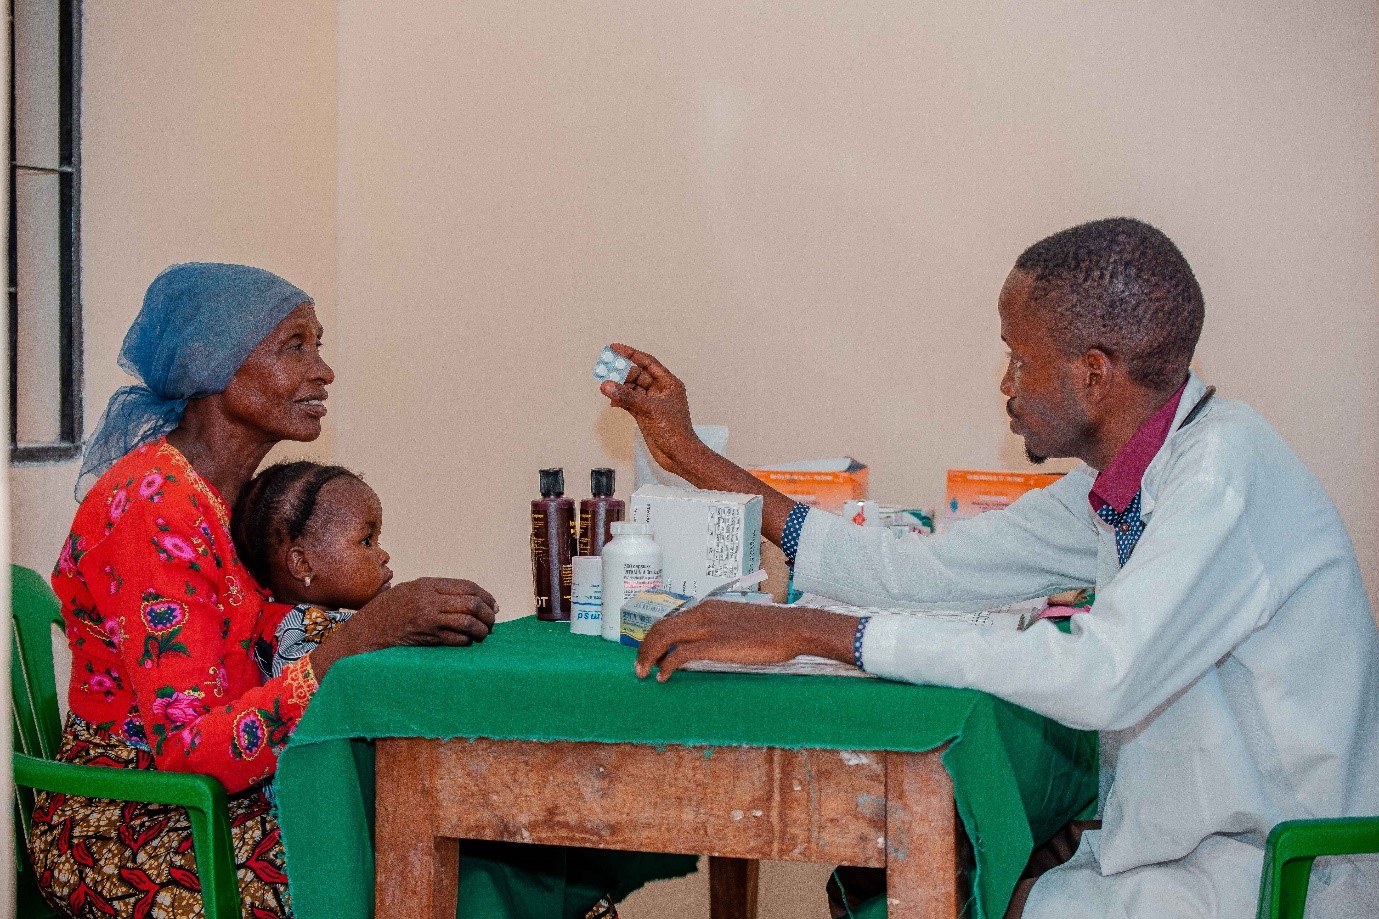 A doctor in Tanzania giving a woman and child some medicine.